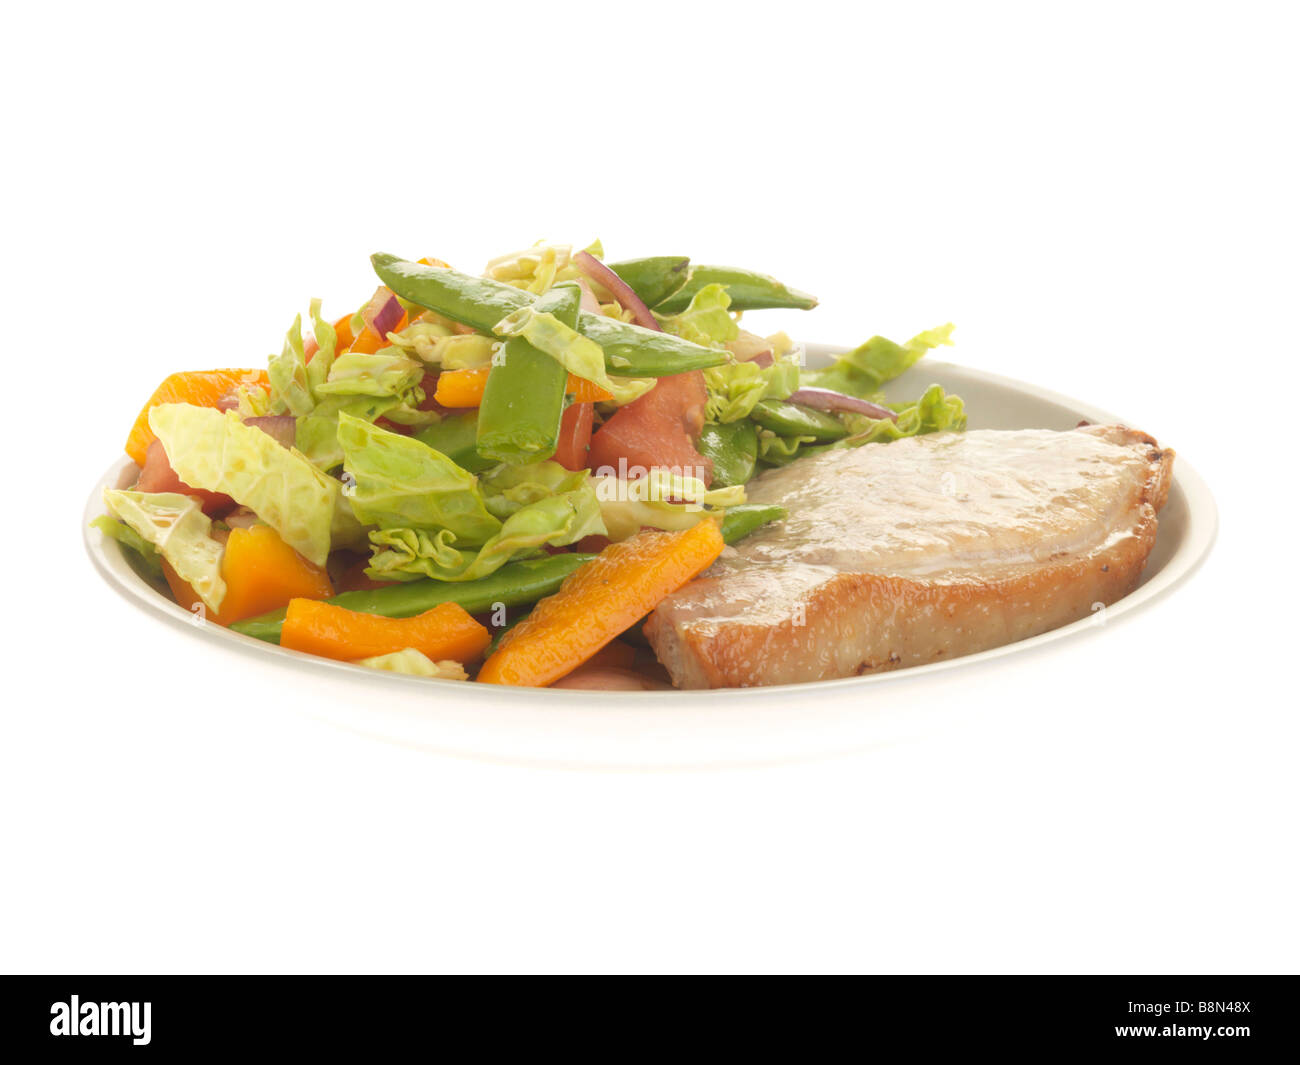 Freshly Grilled Lean Pork Loin Steak With A Fresh Healthy Summer Salad Isolated Against A White Background With No People And A Clipping Path Stock Photo